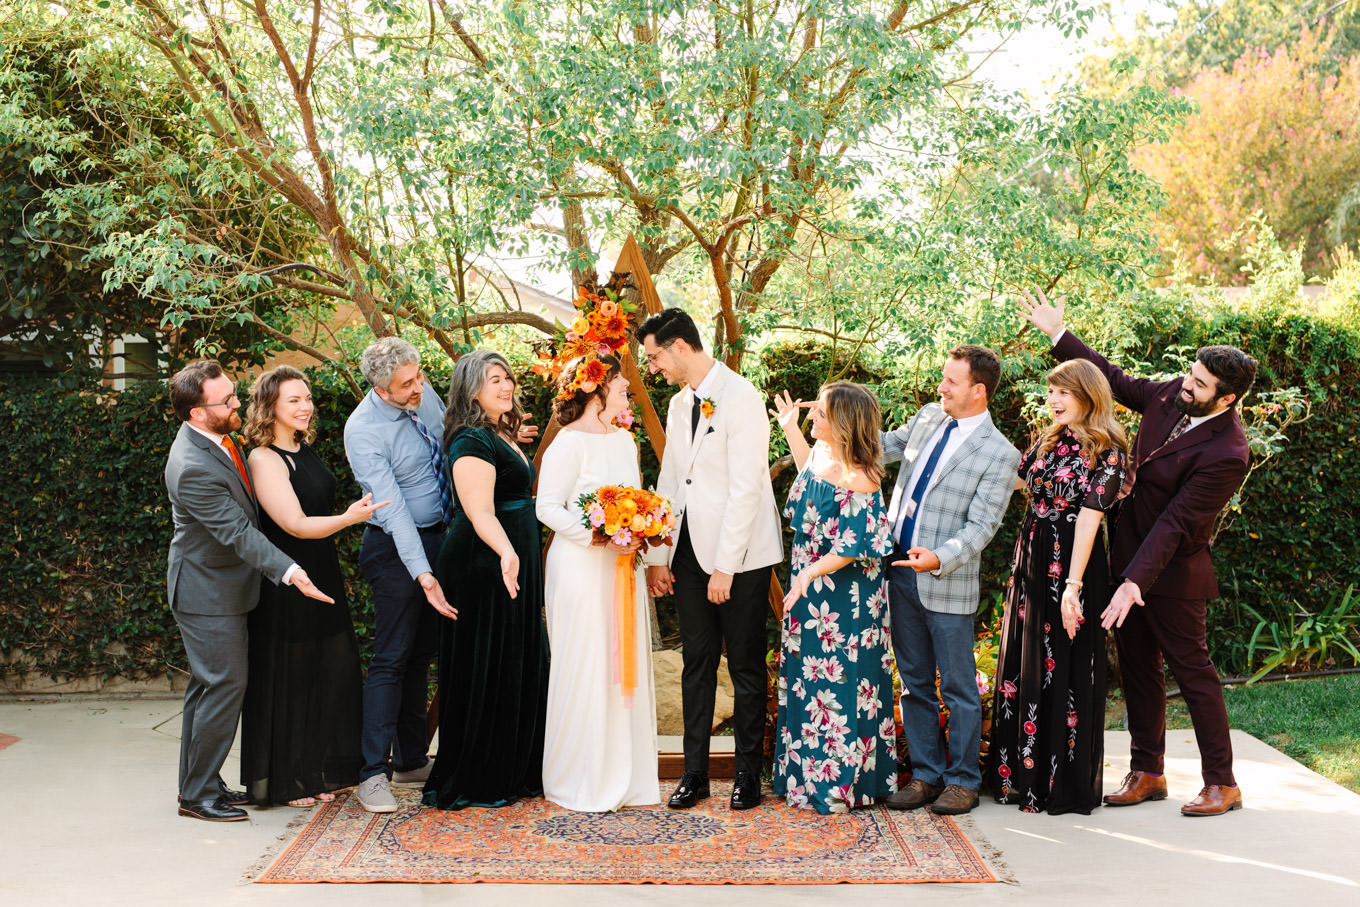 Family photo with bride and groom | Vibrant backyard micro wedding featured on Green Wedding Shoes | Colorful LA wedding photography | #losangeleswedding #backyardwedding #microwedding #laweddingphotographer Source: Mary Costa Photography | Los Angeles